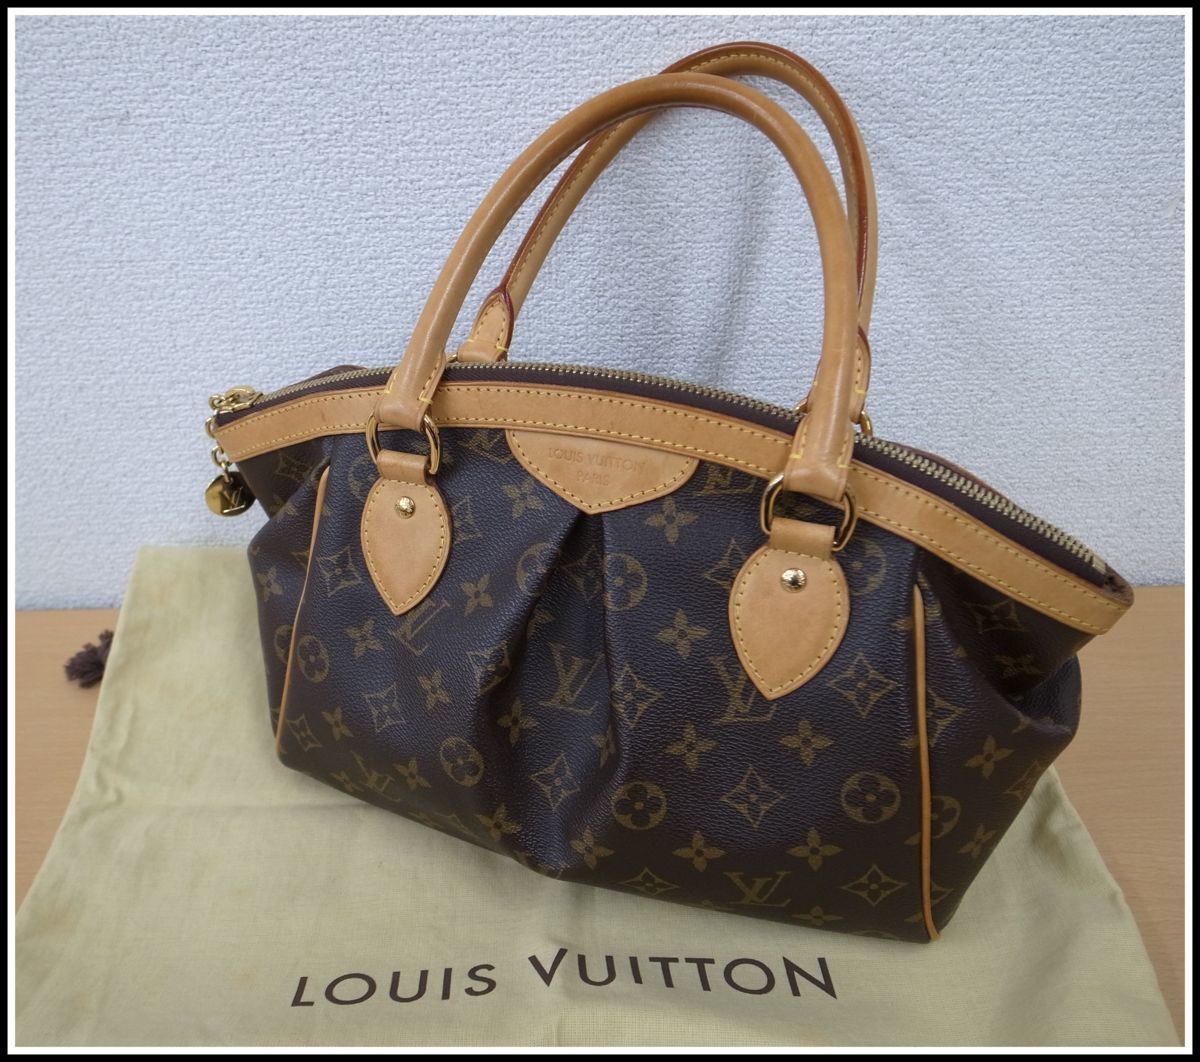 SALE／100%OFF】 B210T LOUIS VUITTON ルイヴィトン モノグラム